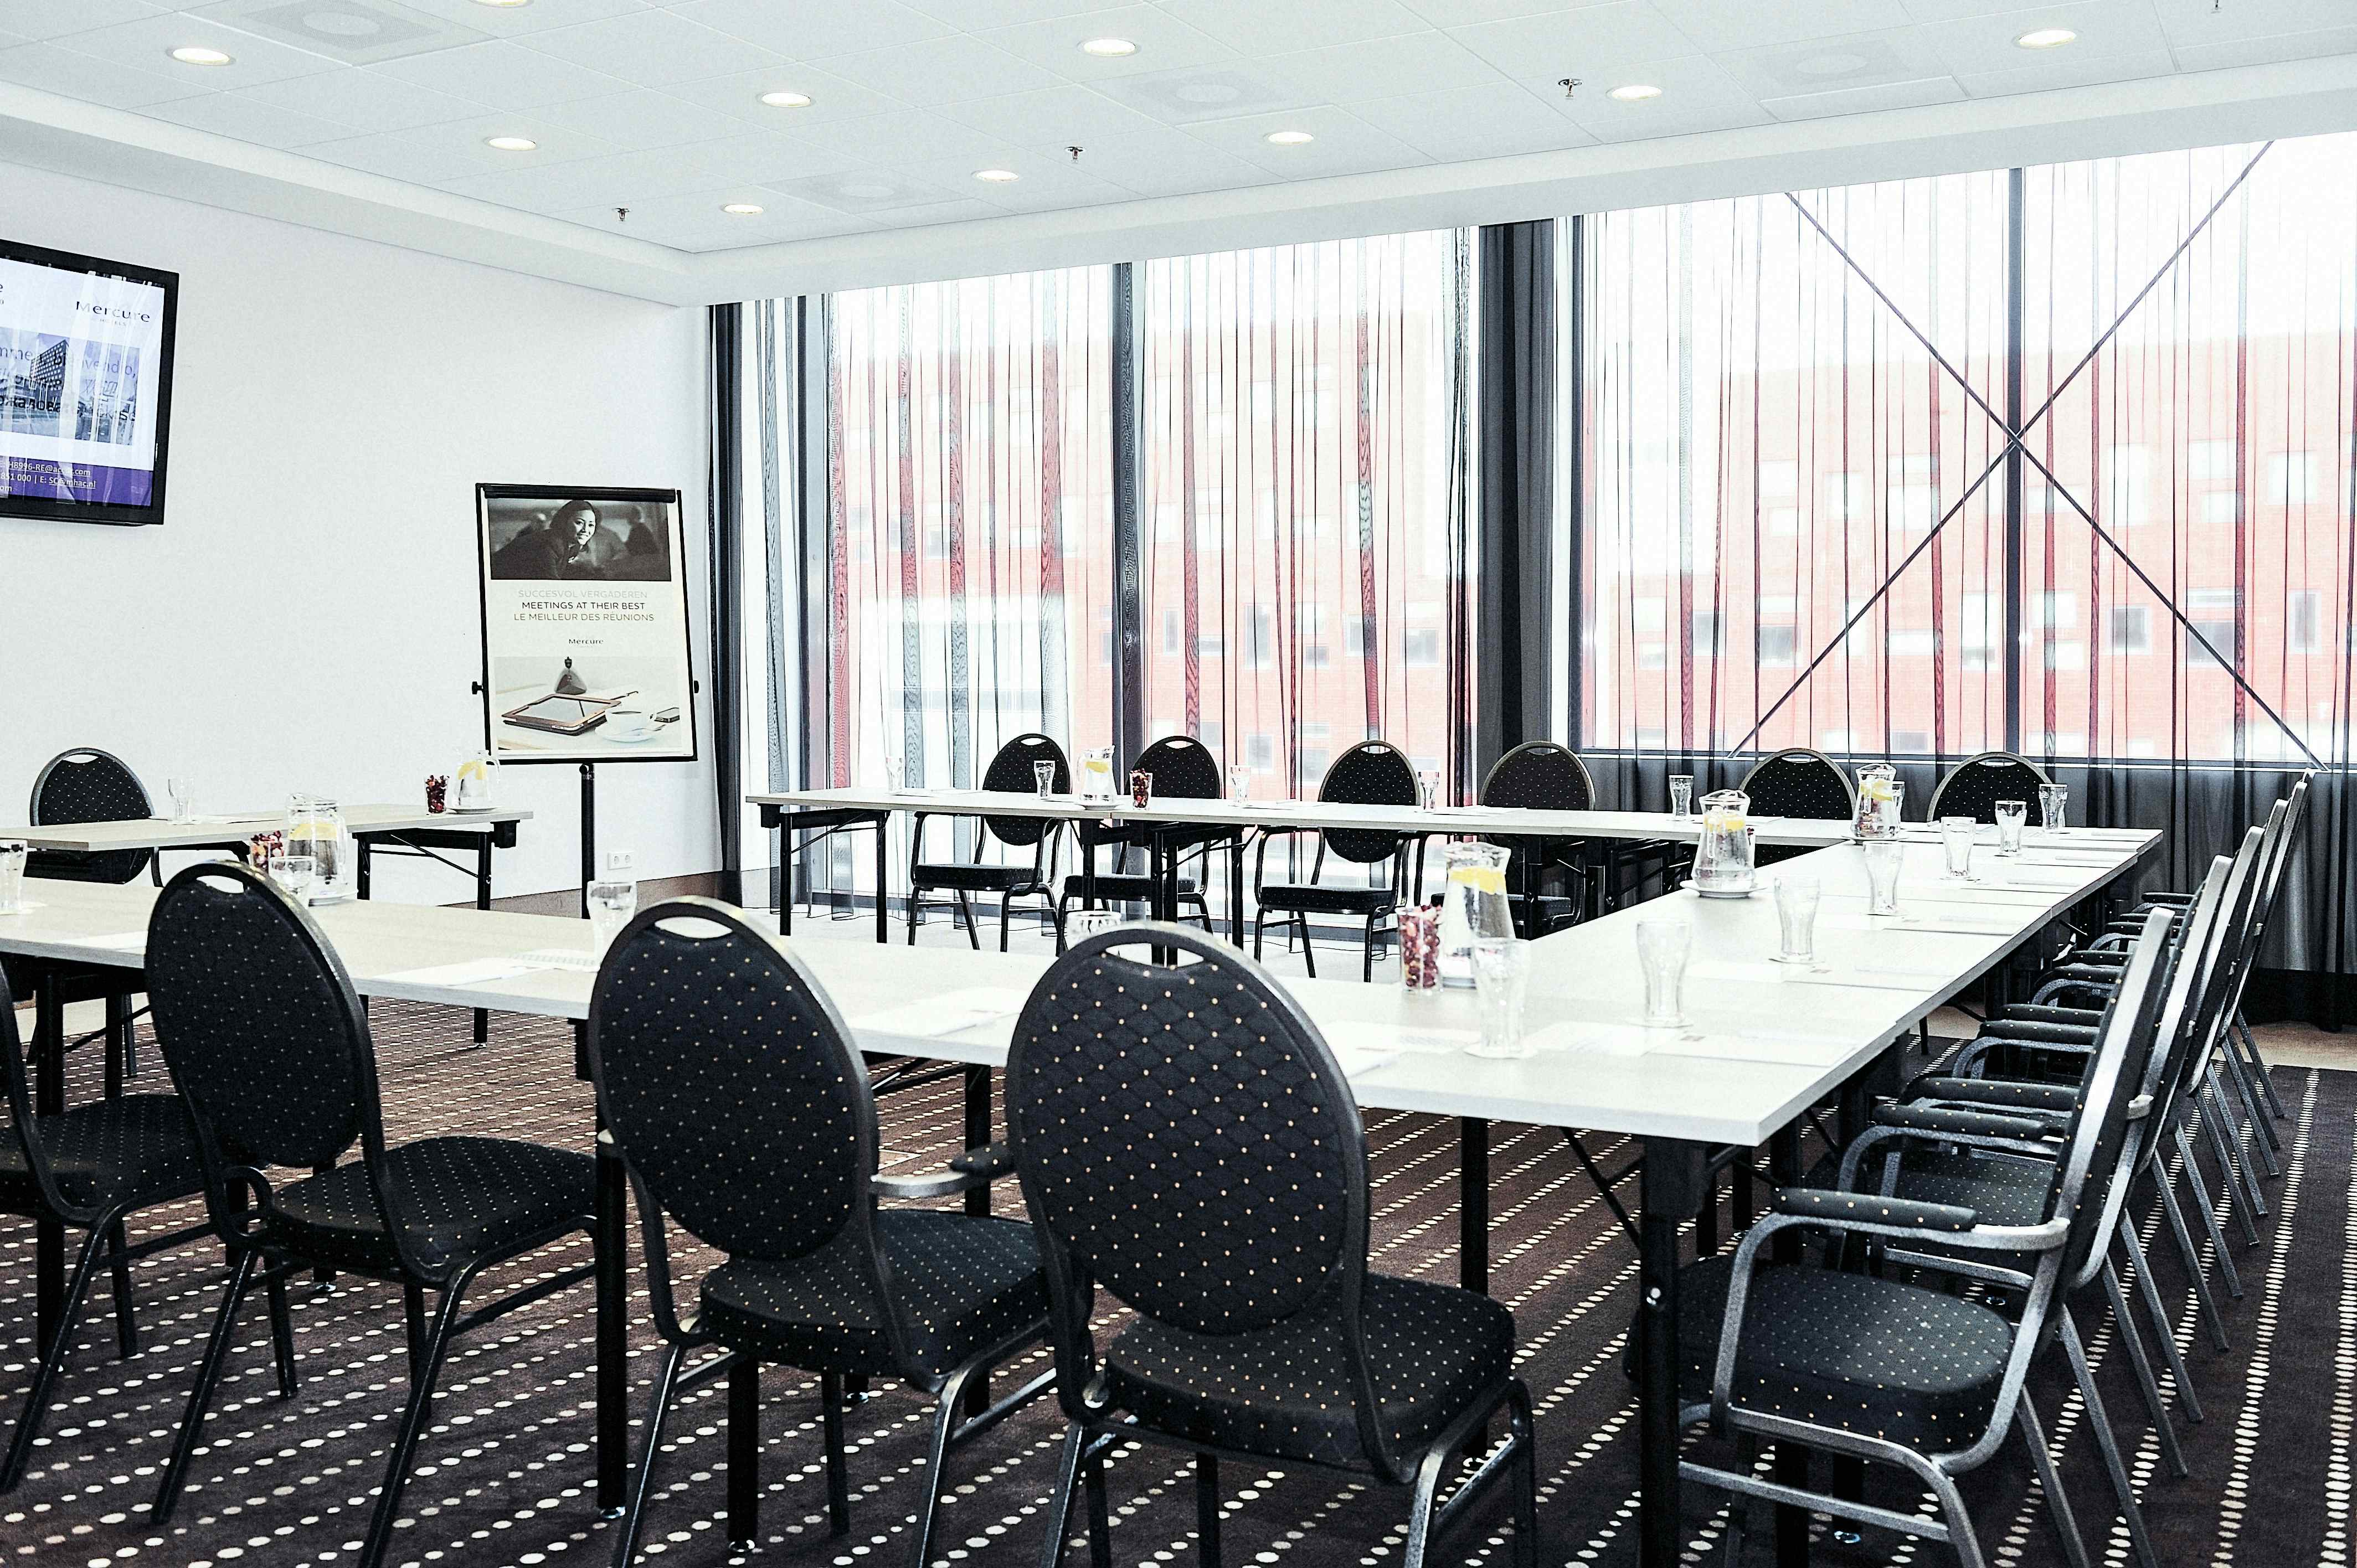 Conference room 2/3, 4, 5 and 6, Mercure Hotel Amersfoort Centre